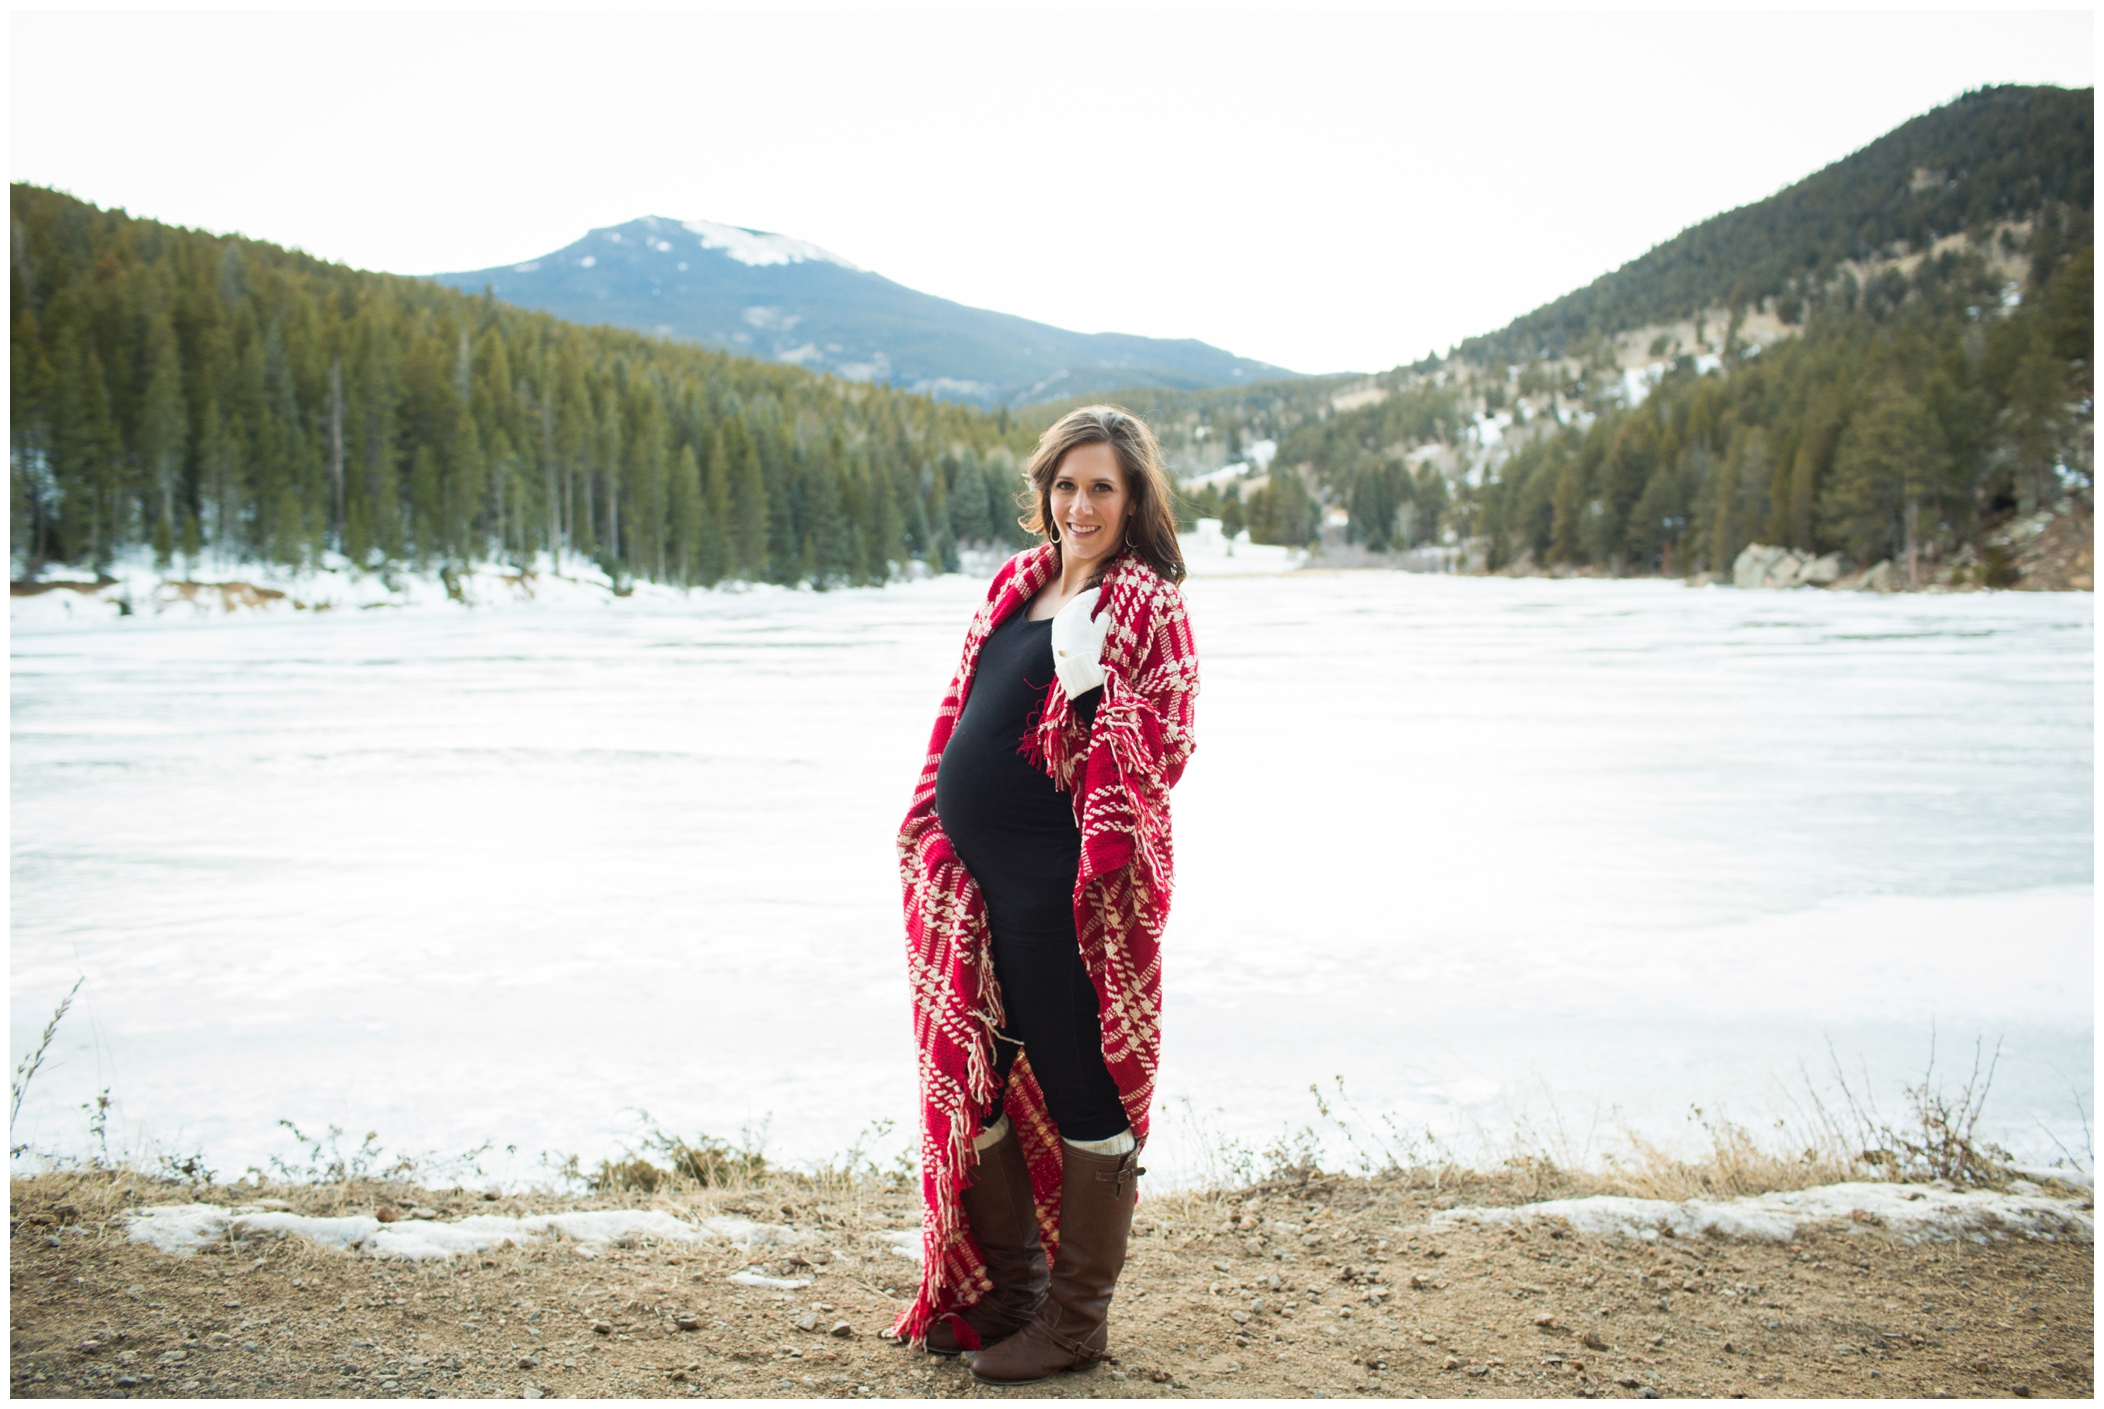 Colorado maternity photos at Frosberg Park by Plum Pretty Photography